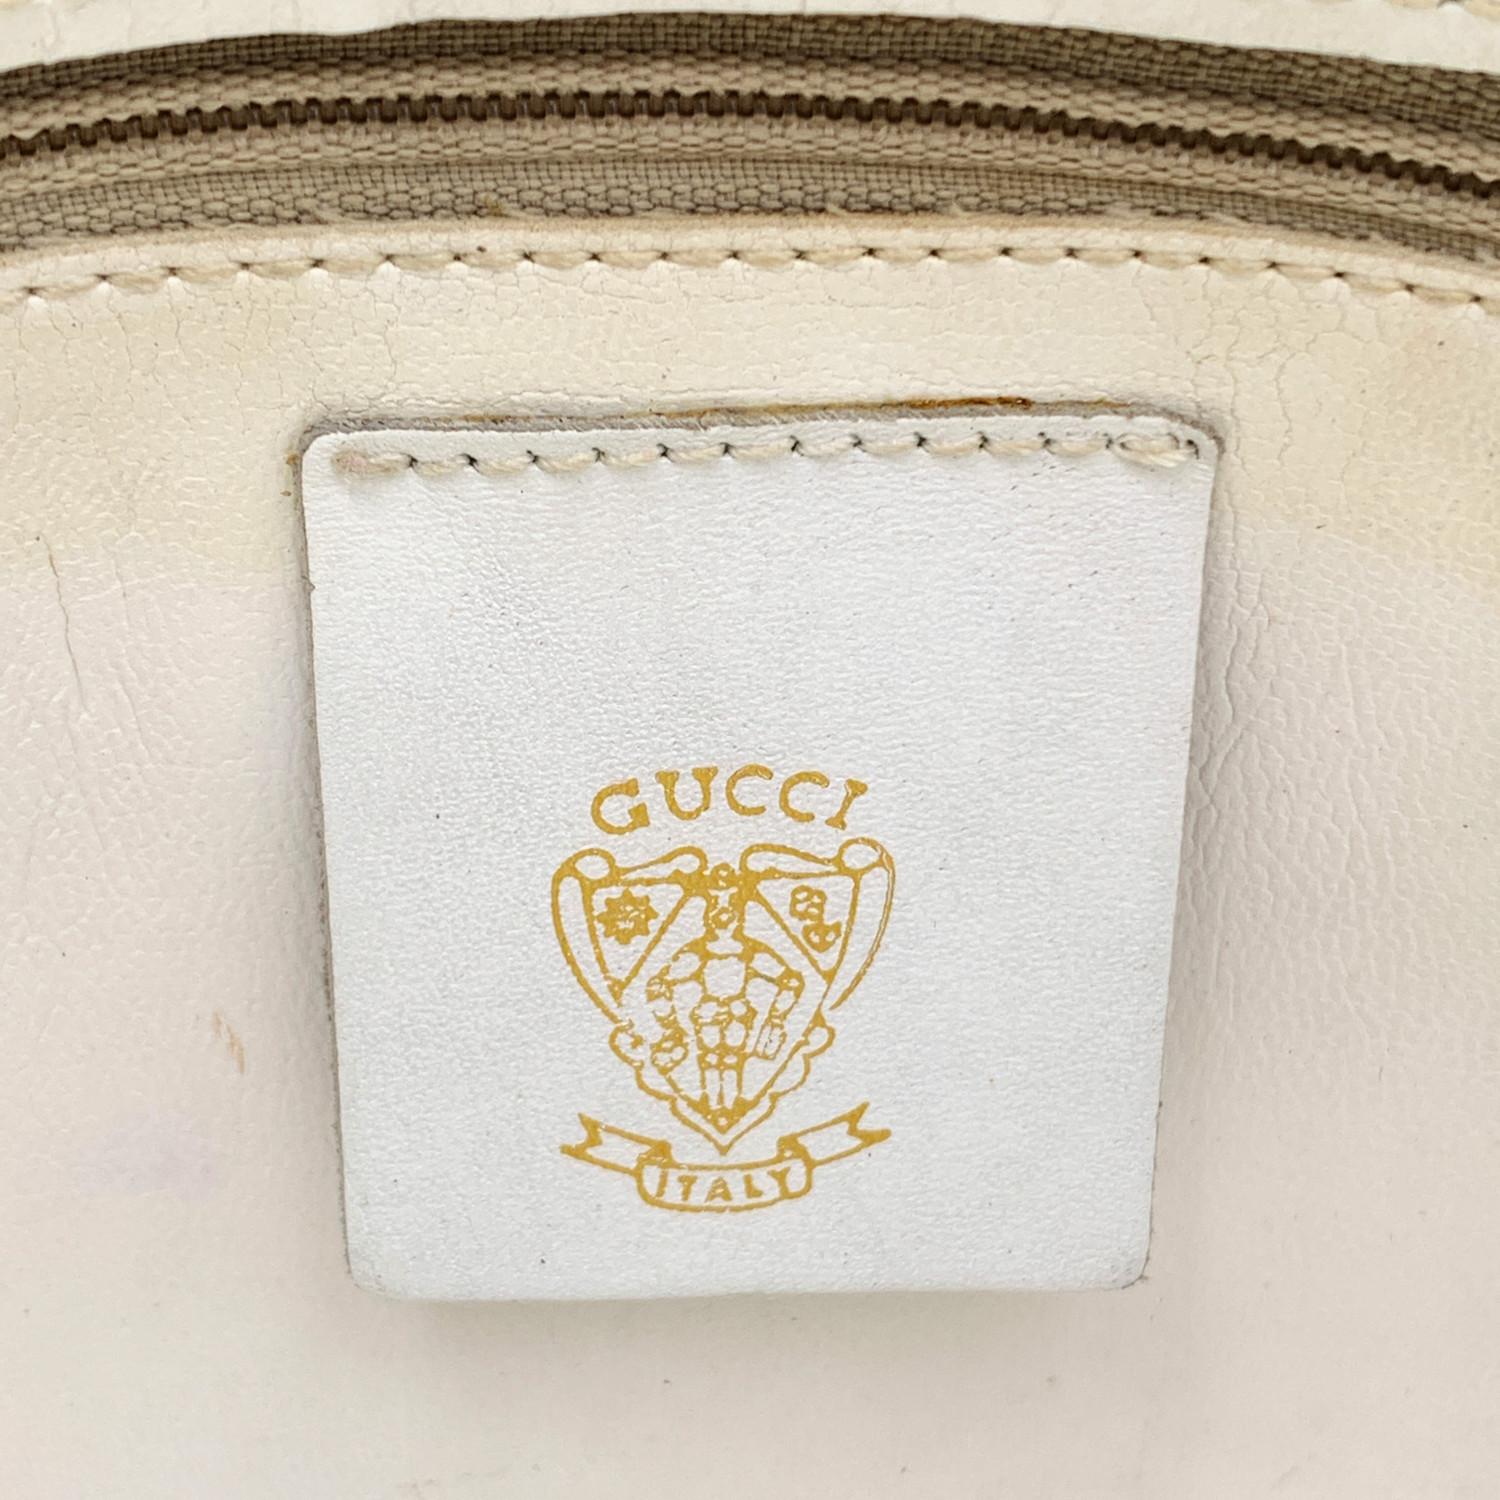 Women's Gucci Vintage White Leather Bucket Shoulder Bag with Stripes